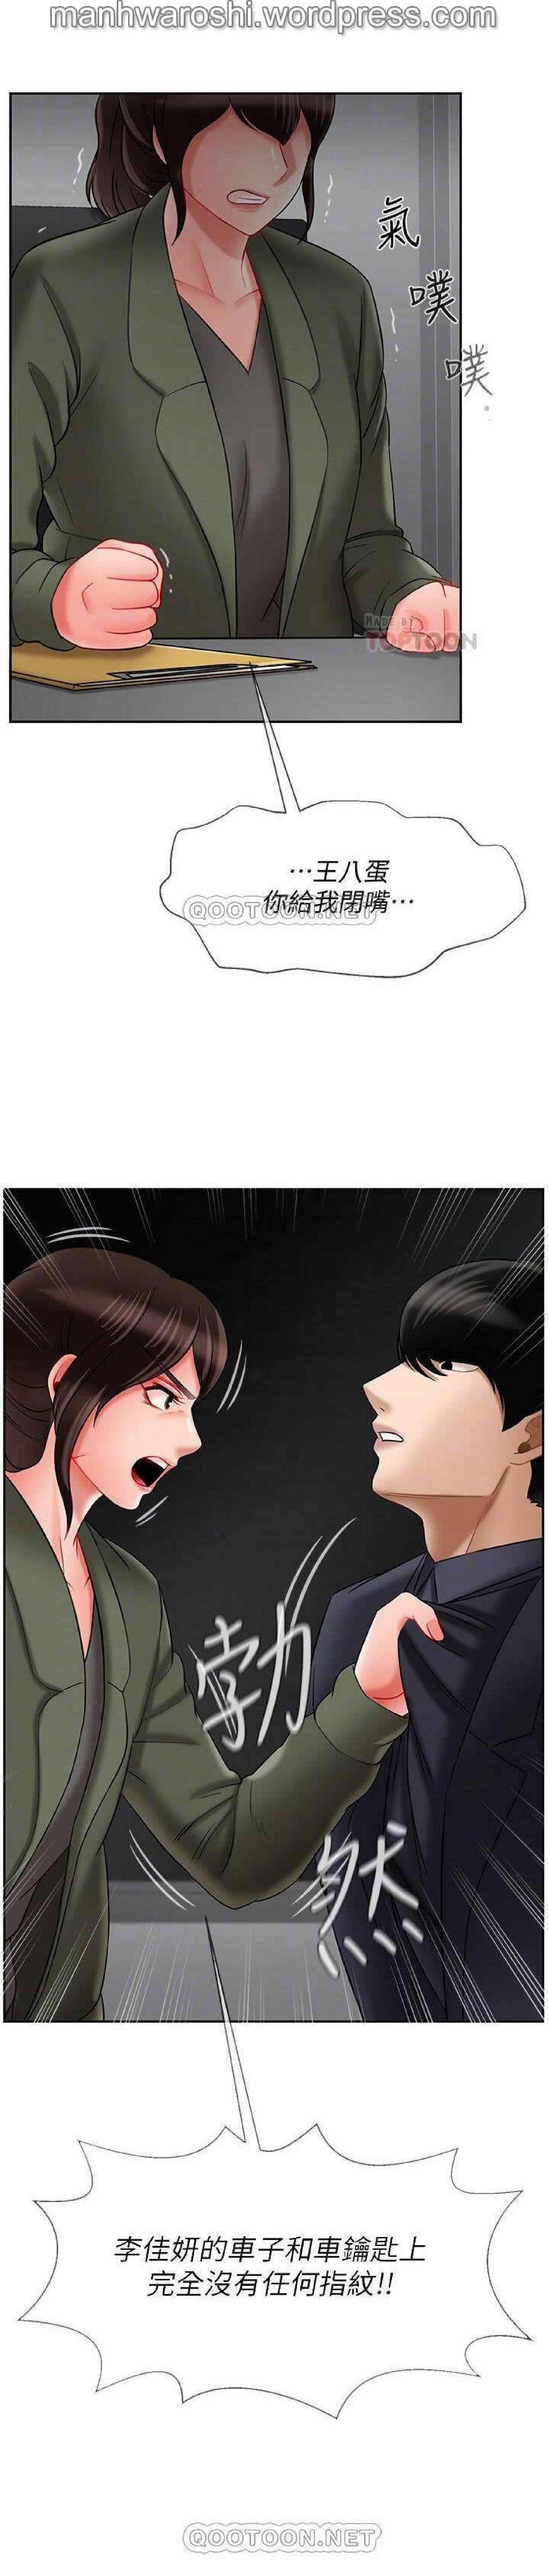 Pissing 坏老师 | PHYSICAL CLASSROOM 21 [Chinese] Manhwa Spoon - Page 10